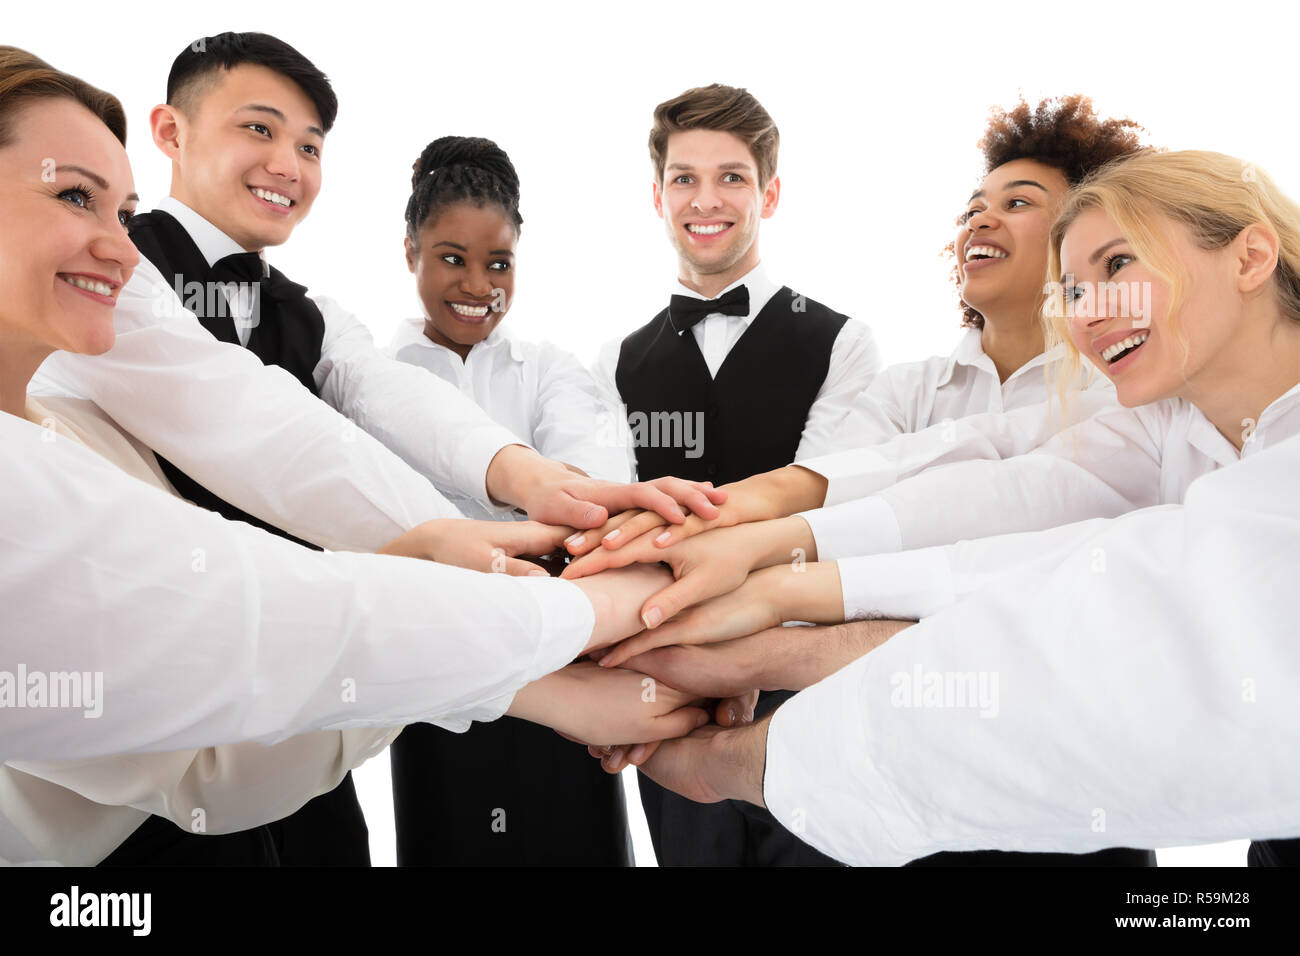 Smiling Young Restaurant Staff Stacking Hands Stock Photo